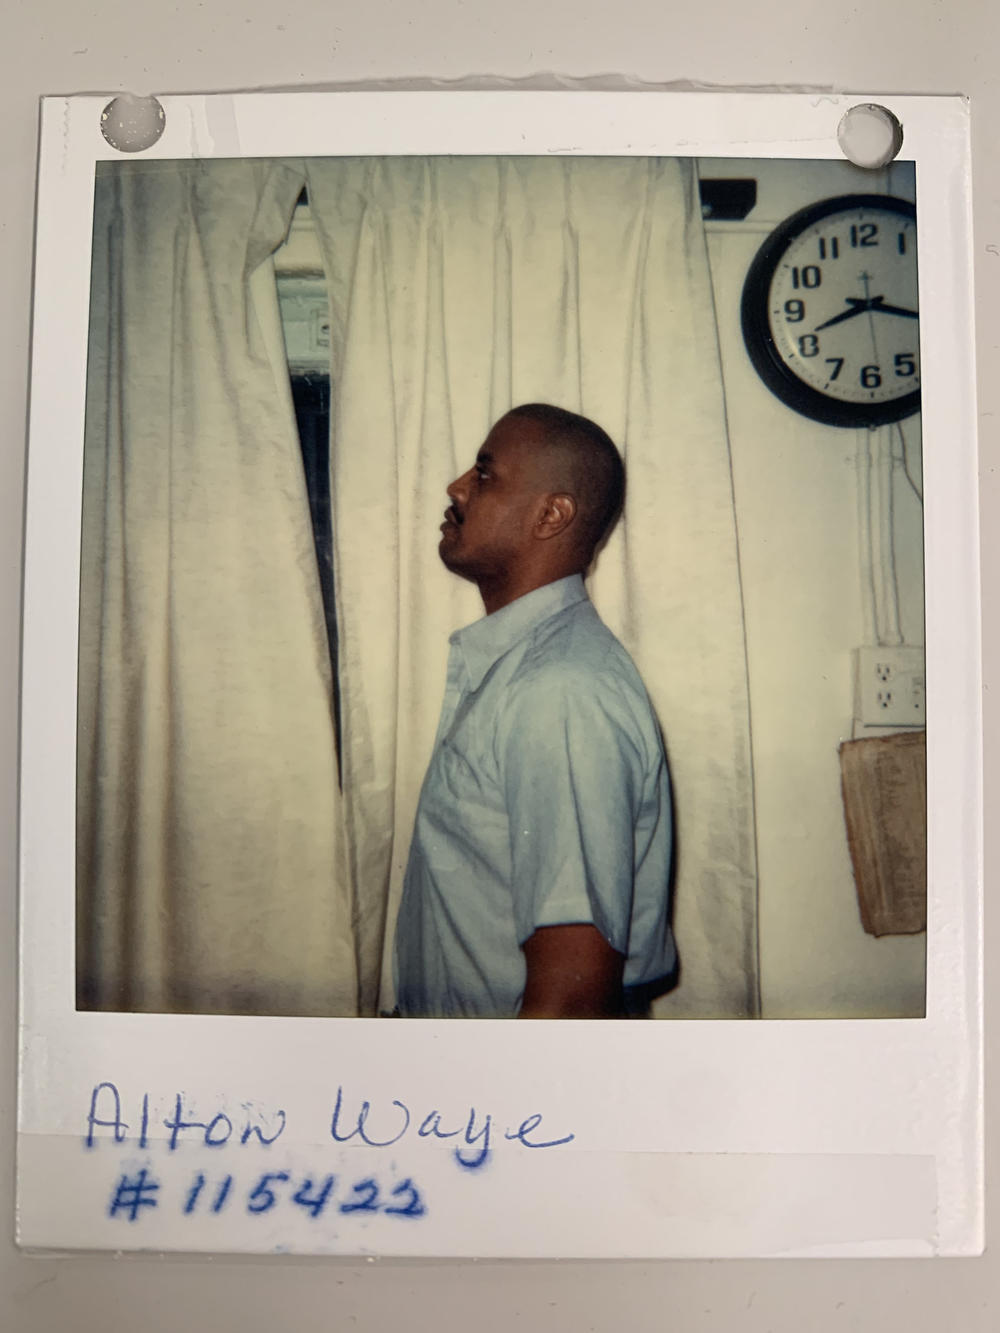 Oliver's briefcase also contained other official execution documents from the prison, like this photo of Alton Waye that was taken before he was executed in 1989.